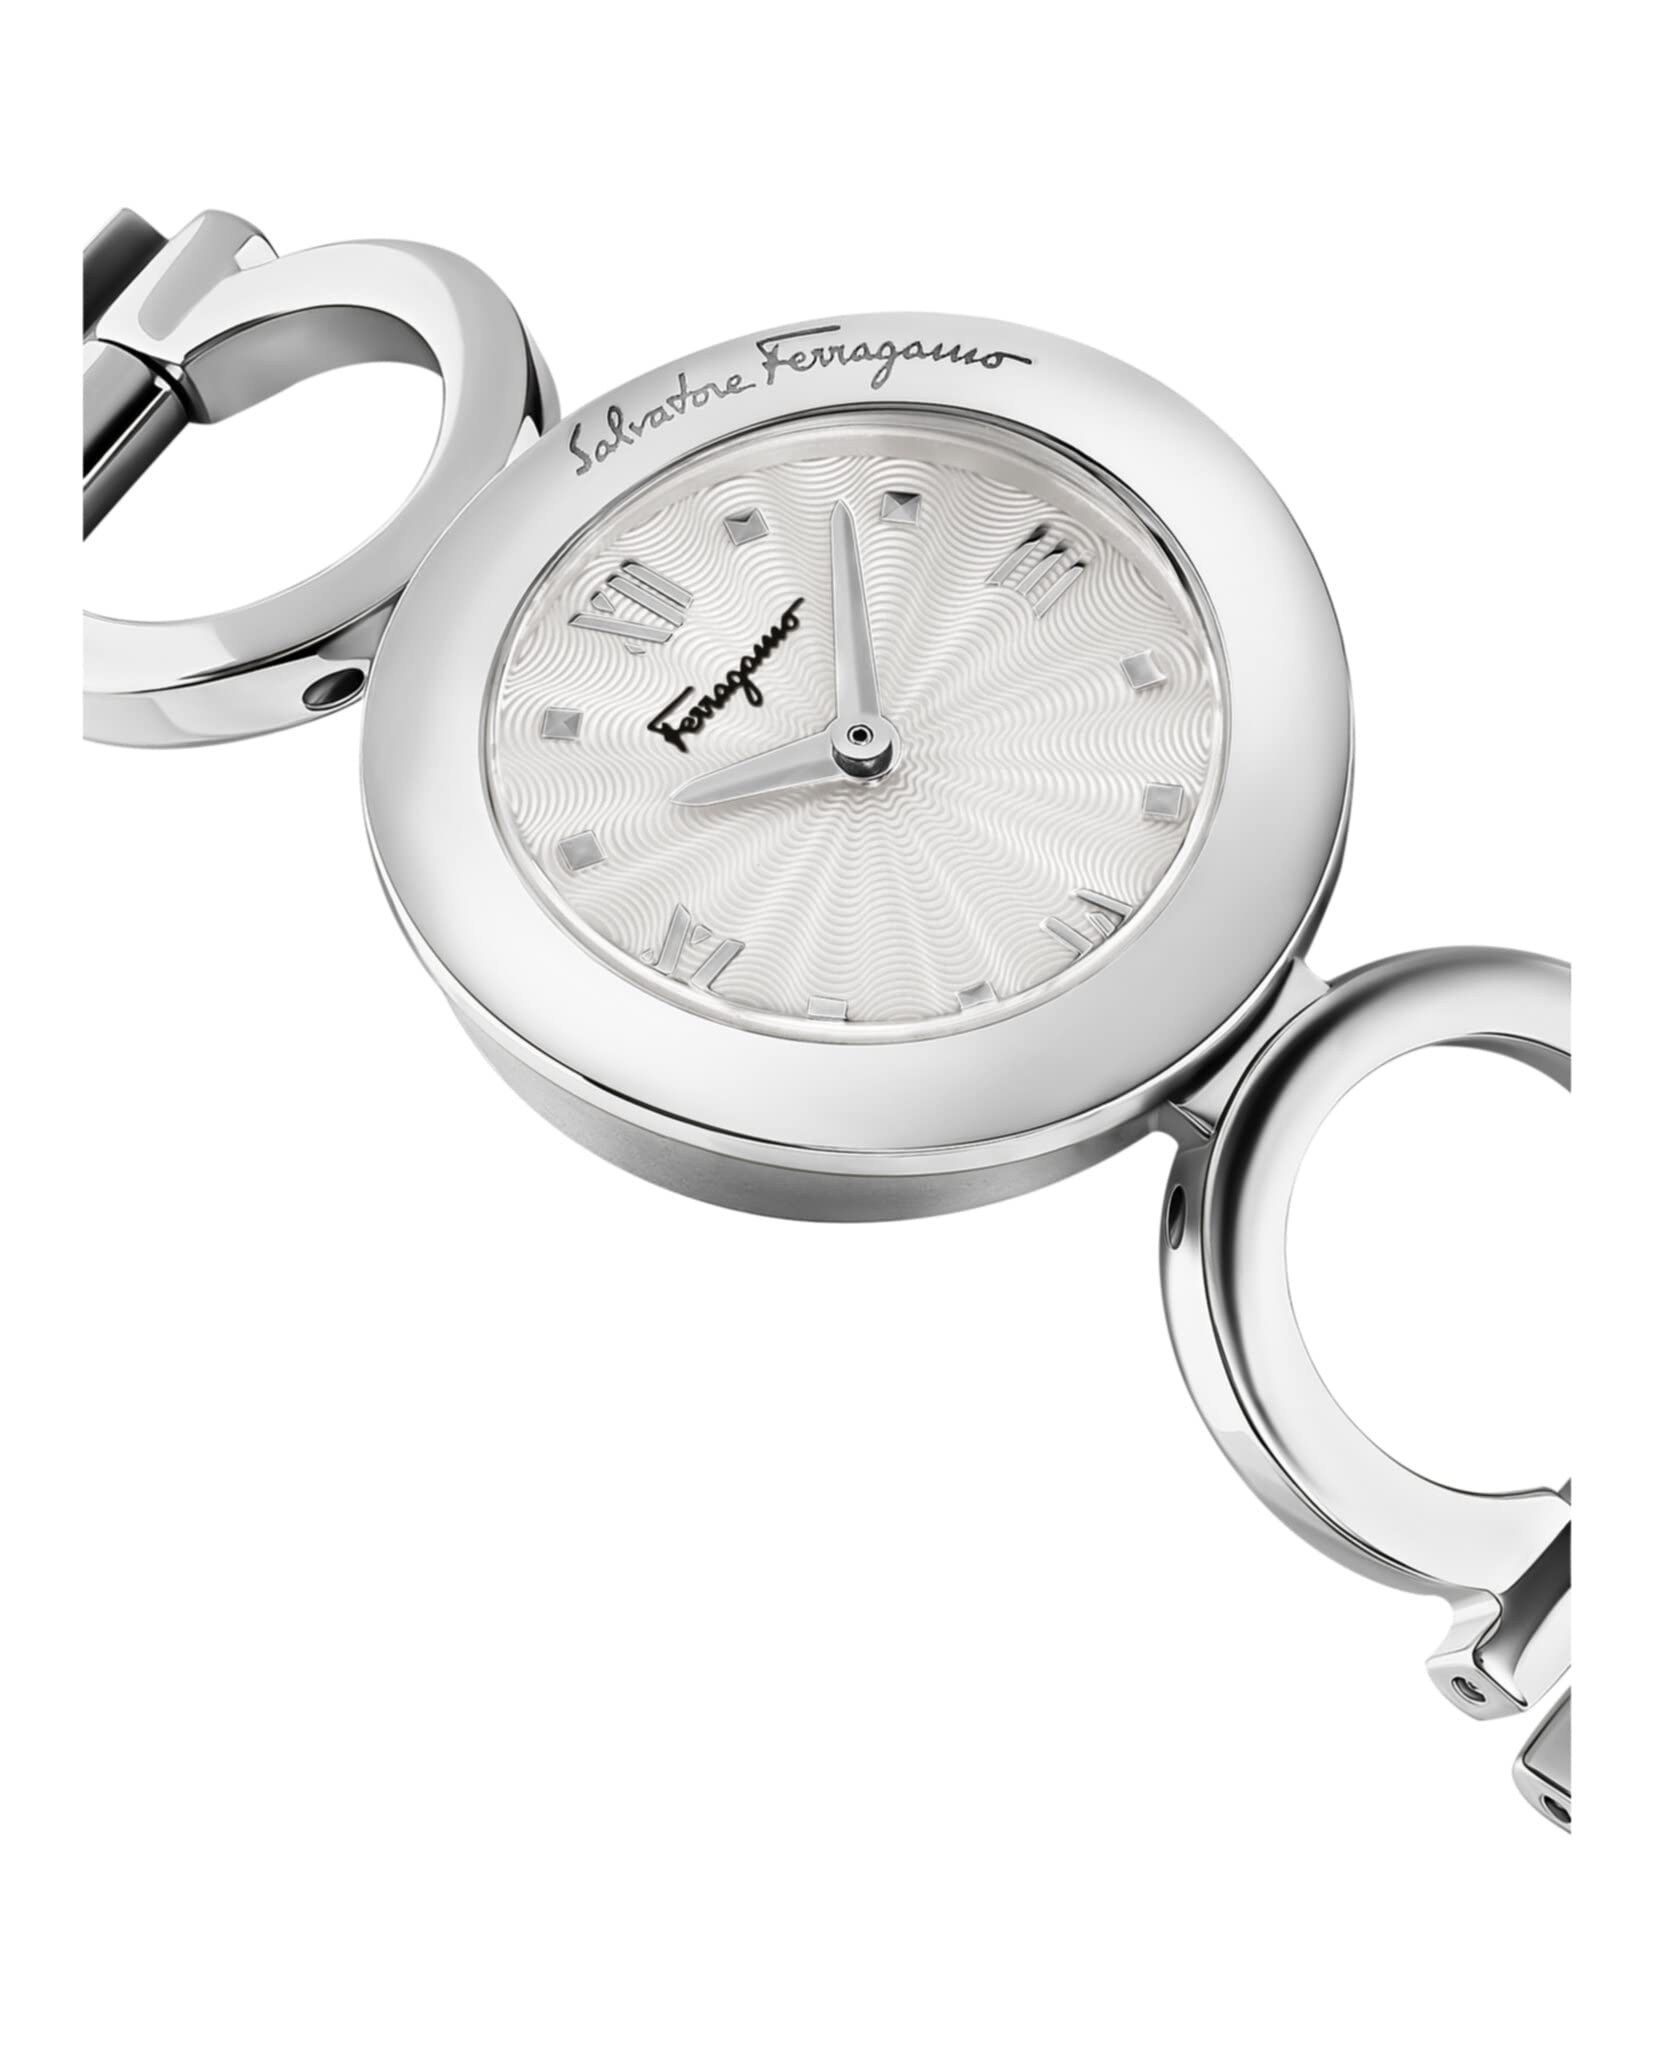 Ferragamo Womens Swiss Made Watch Gancino Collection Featuring Adjustable Luxurious Stainless Steel Link Bracelet with Jewelry Clasp Closure and Silver Sunray Dial 2 Hand Swiss Quartz Movement